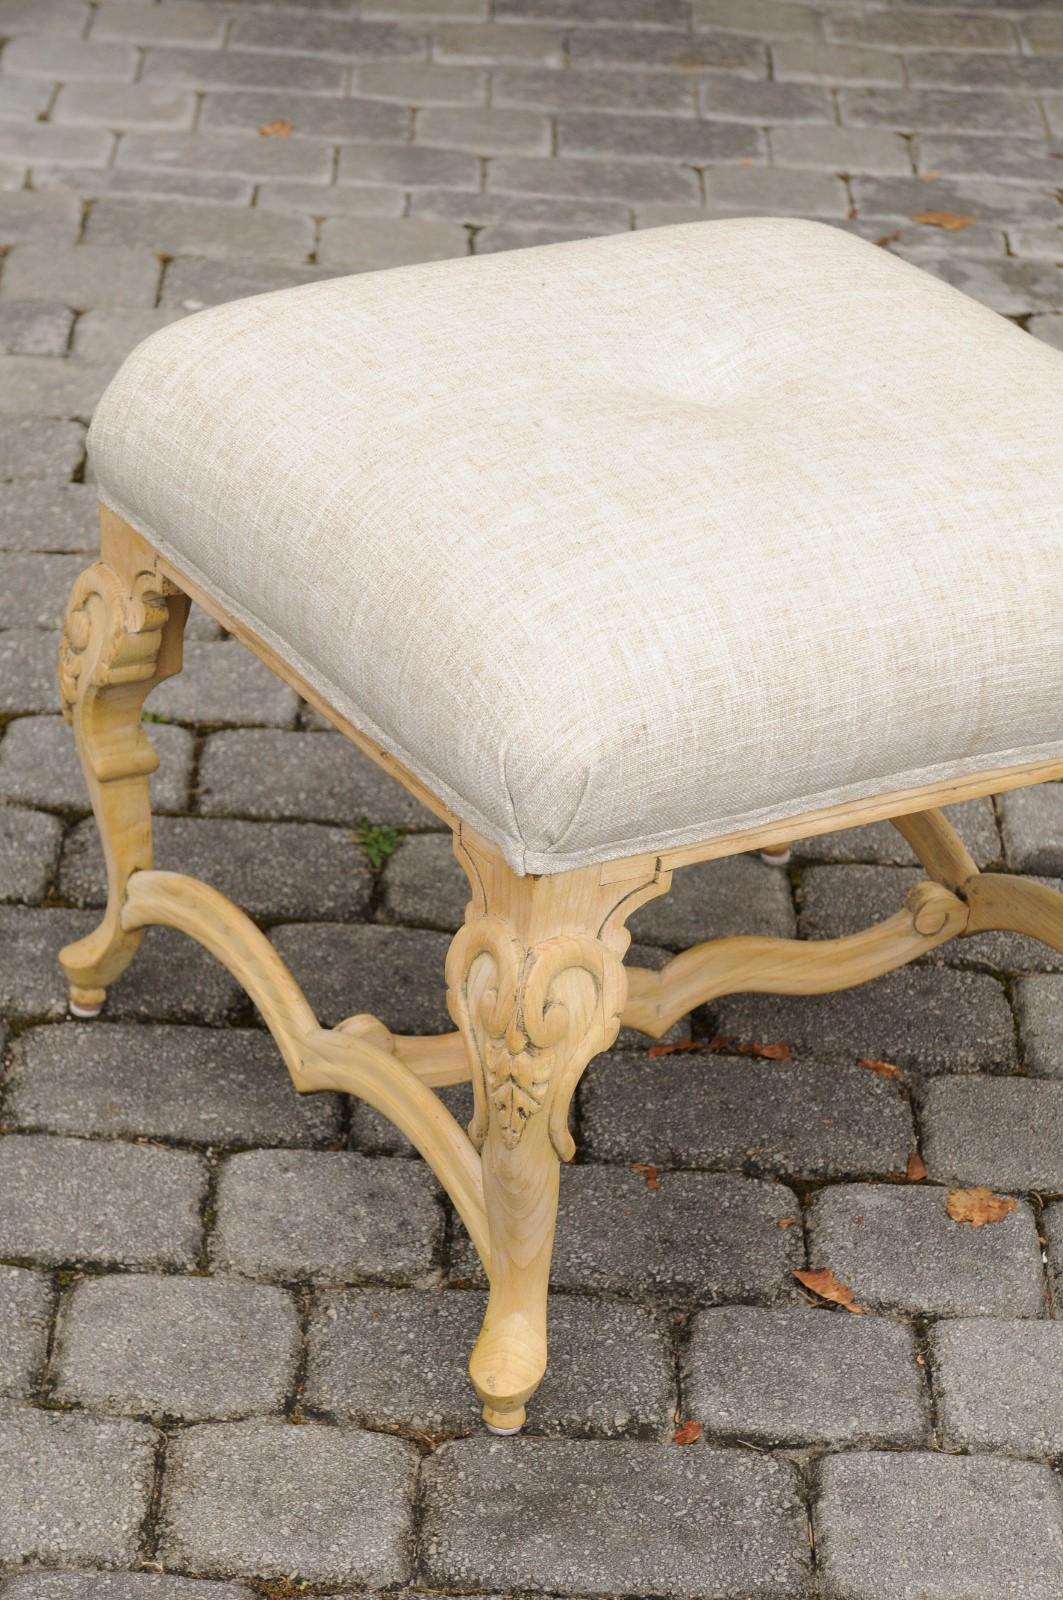 1950s Vintage Italian Rococo Style Ottoman with Cabriole Legs and New Upholstery im Zustand „Gut“ in Atlanta, GA